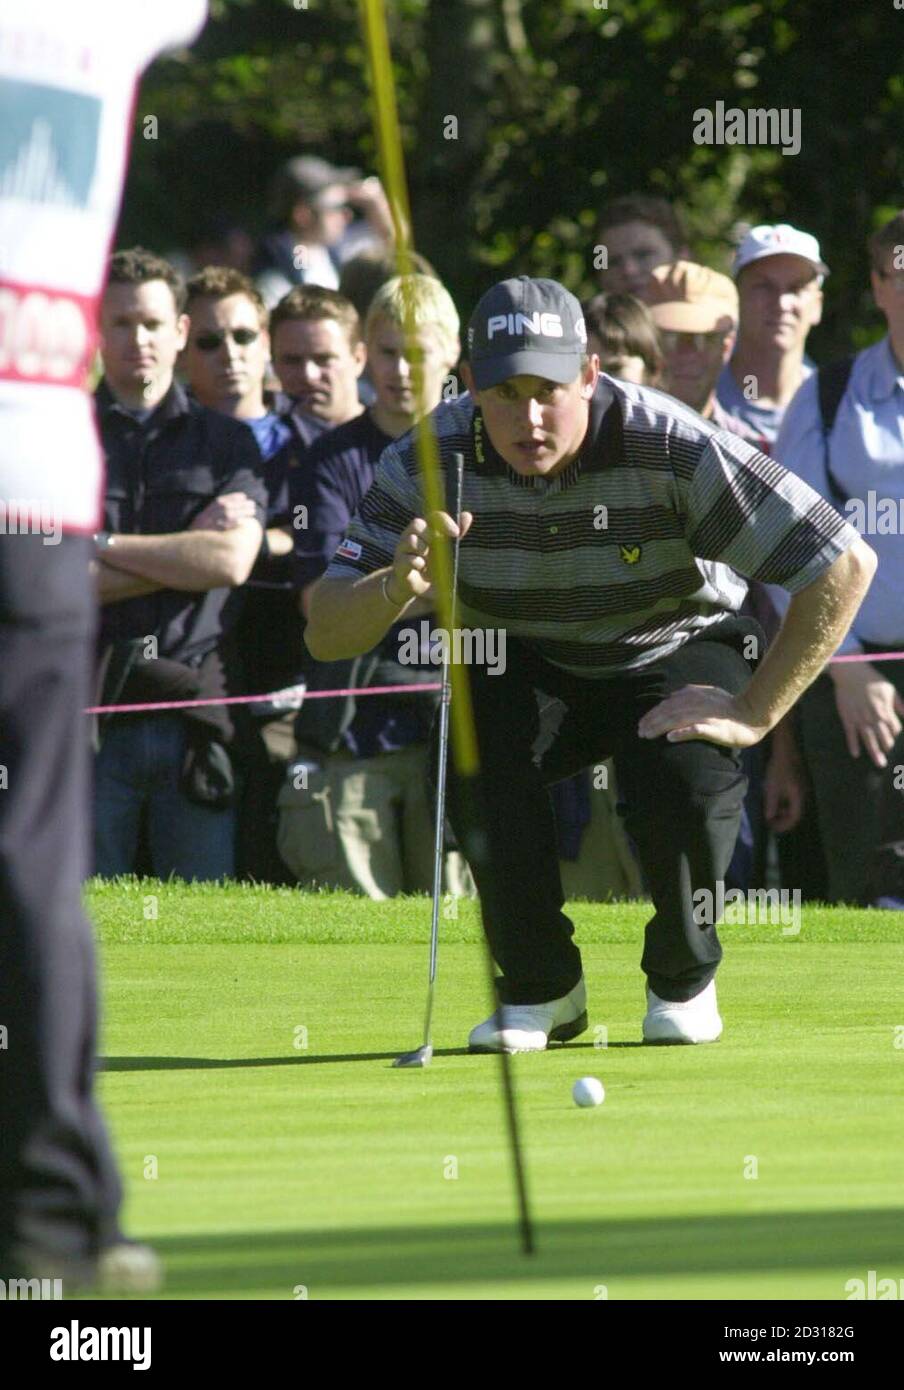 Lee Westwood on the 4th green lines up his putt, during the final of the Cisco World Match Play Championship at Wentworth. Stock Photo